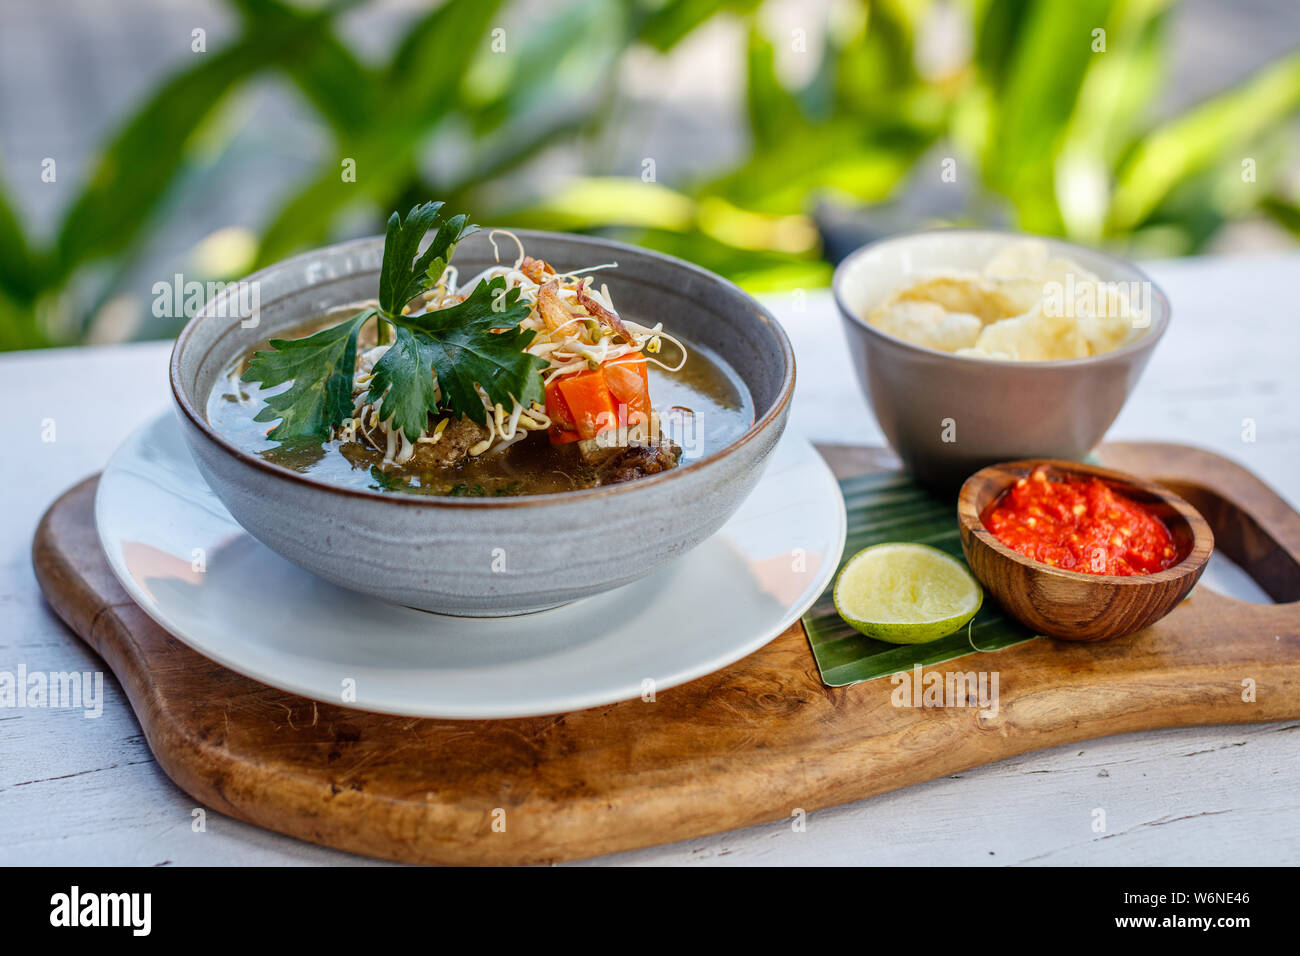 Sop Buntut, oxtail soup with potato, carrot and been sprouts. Served with spicy sambal sauce and potato chips. Traditional Indonesian cuisine. Stock Photo